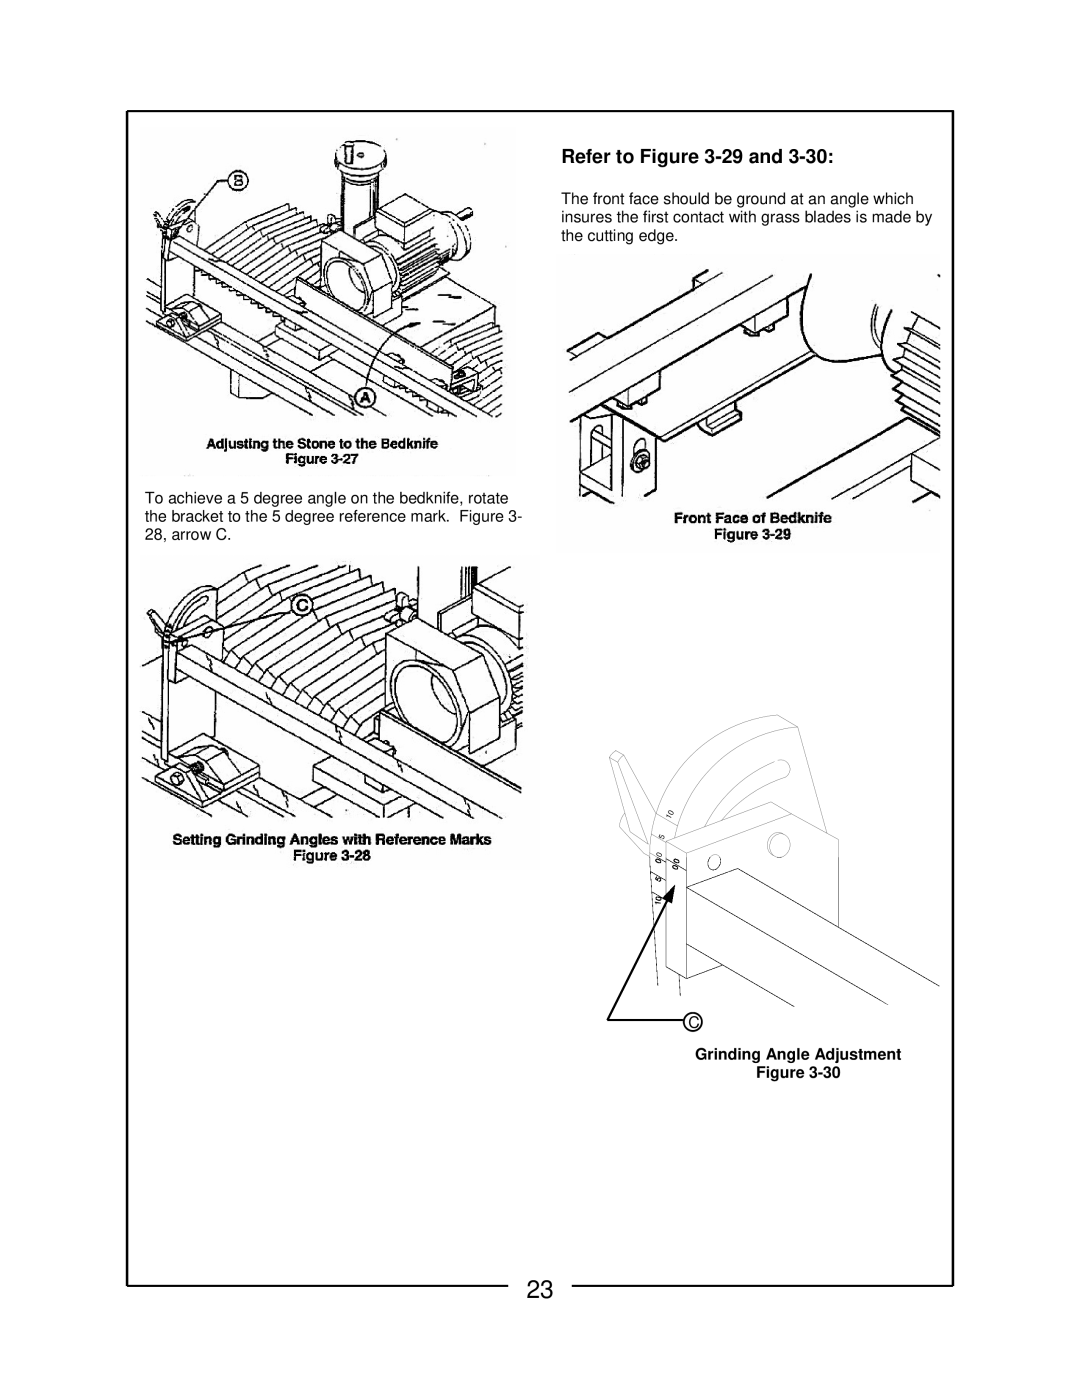 Locke RS-5100 manual Refer to -29 and, Grinding Angle Adjustment 